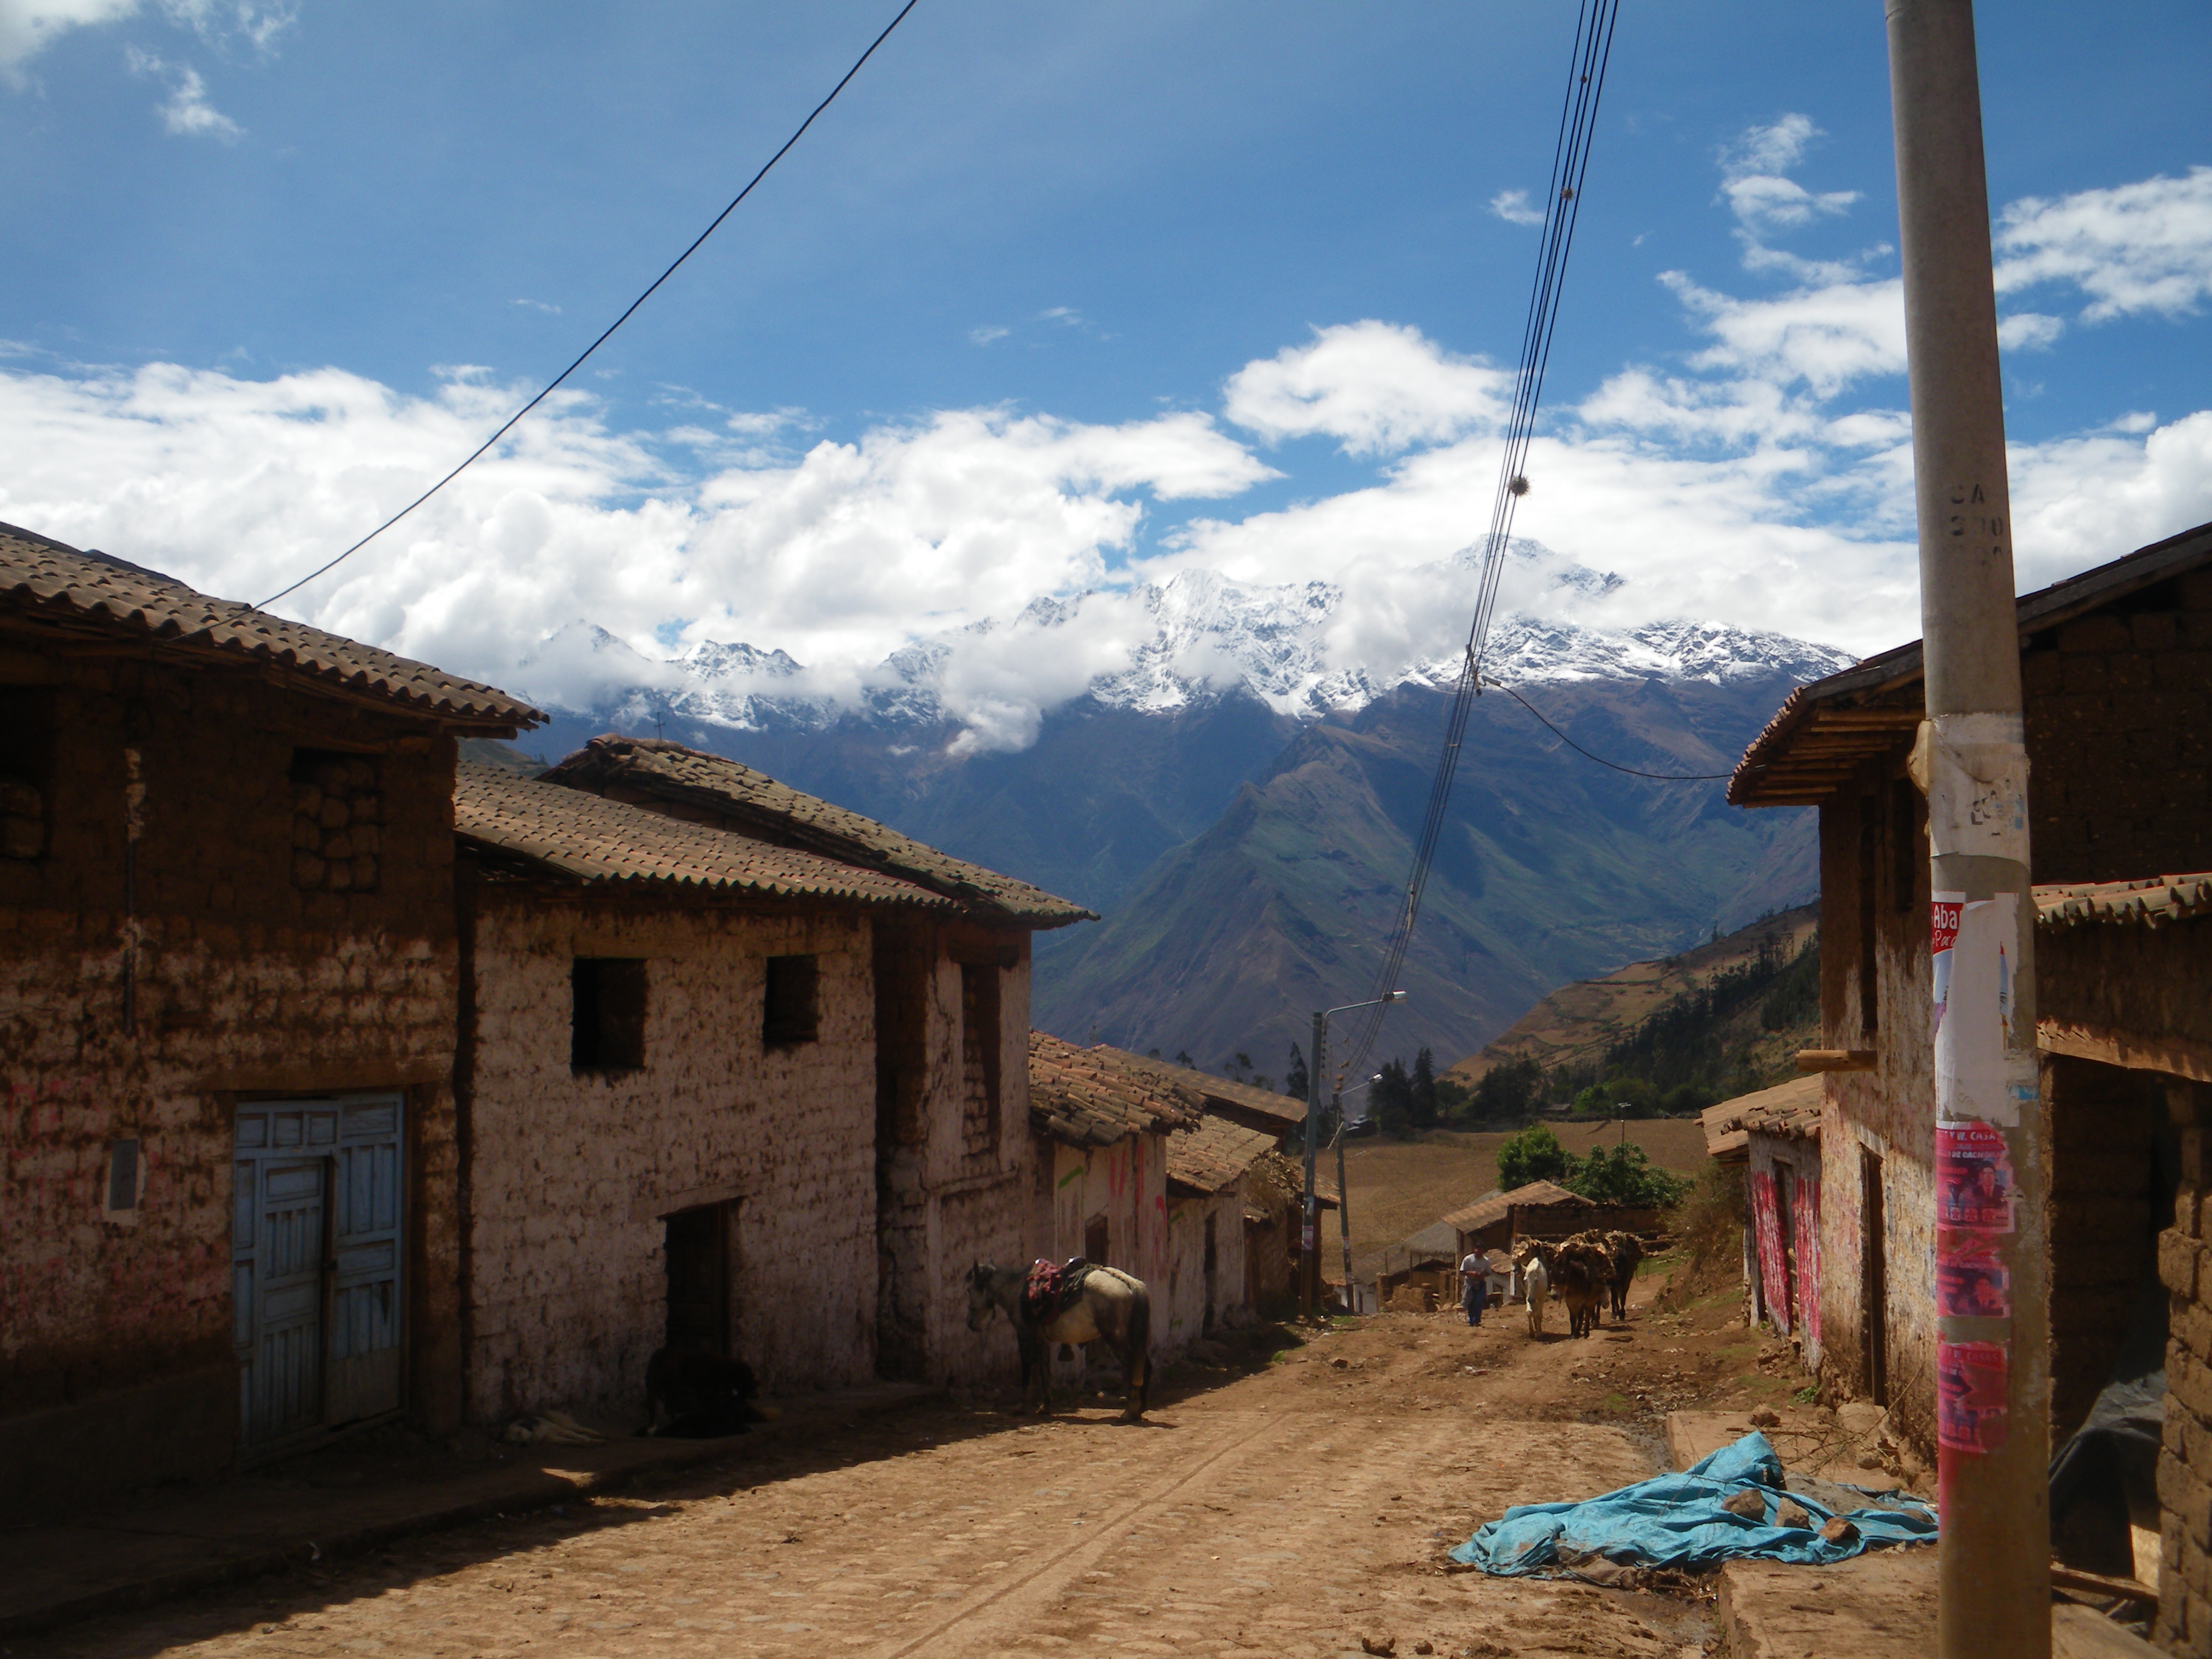 South American travel diary, Part 4. September 2010